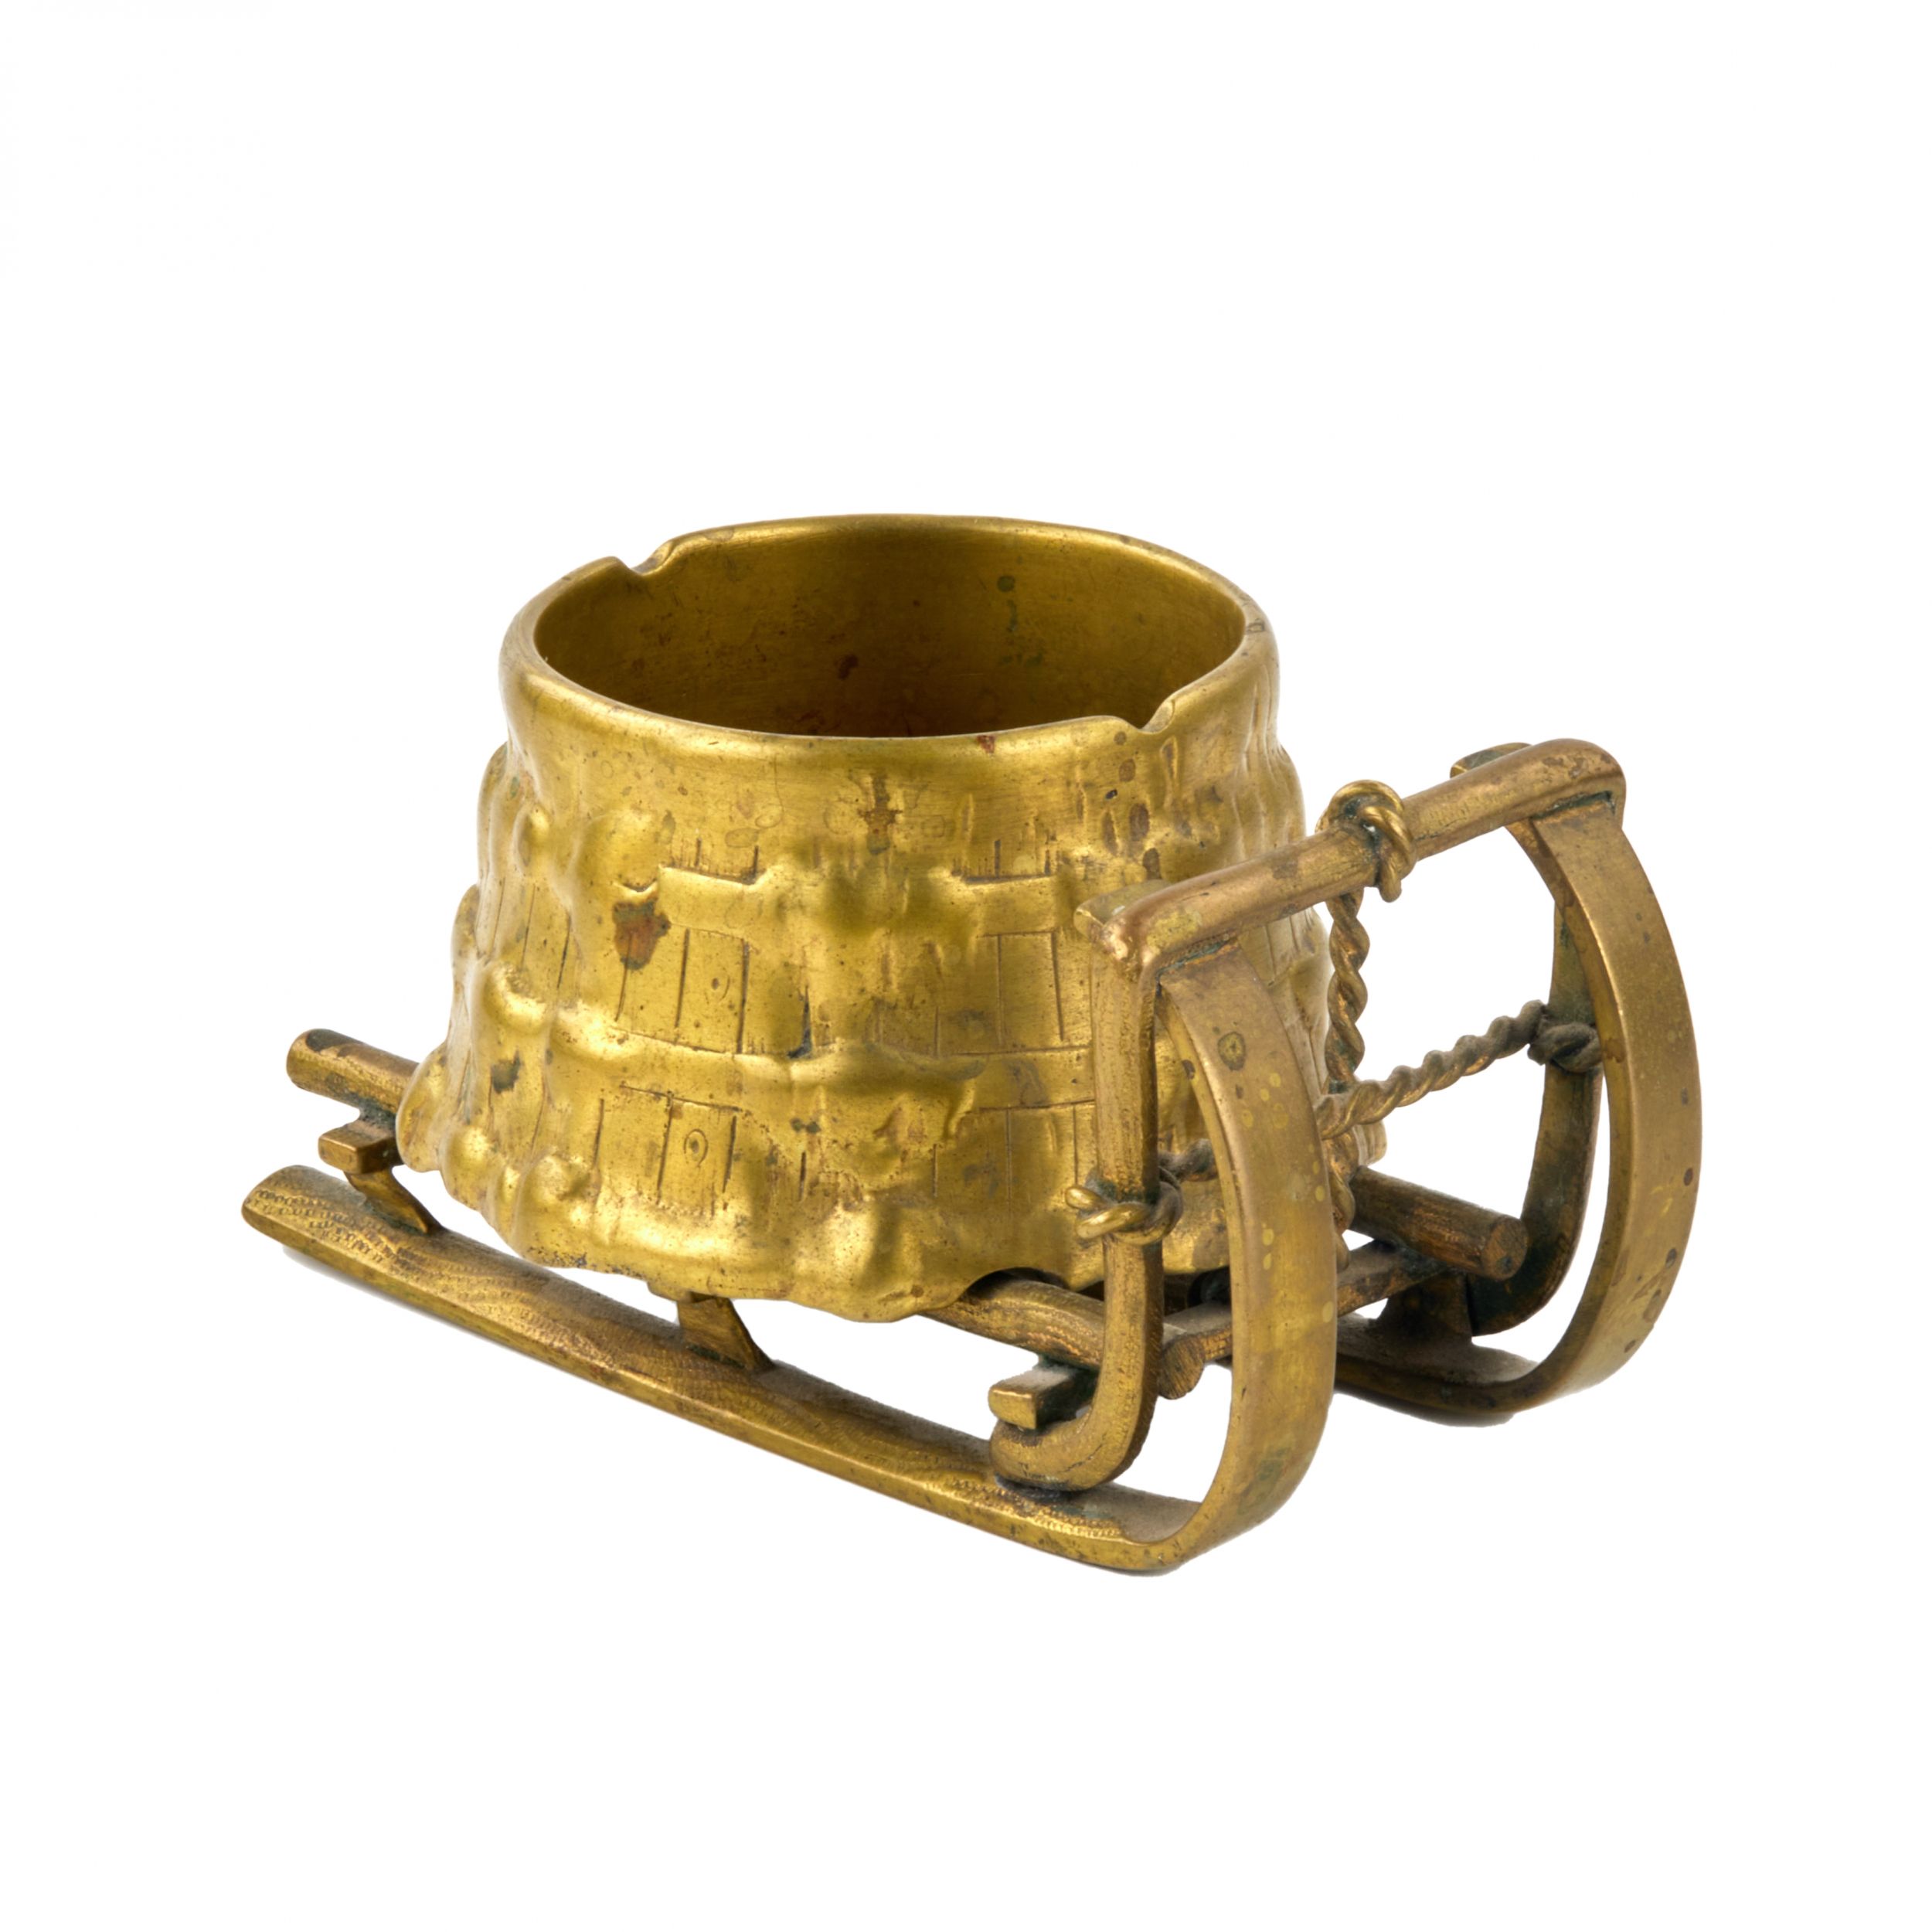 Brass-ashtray-Water-sleigh-Late-19th-century-